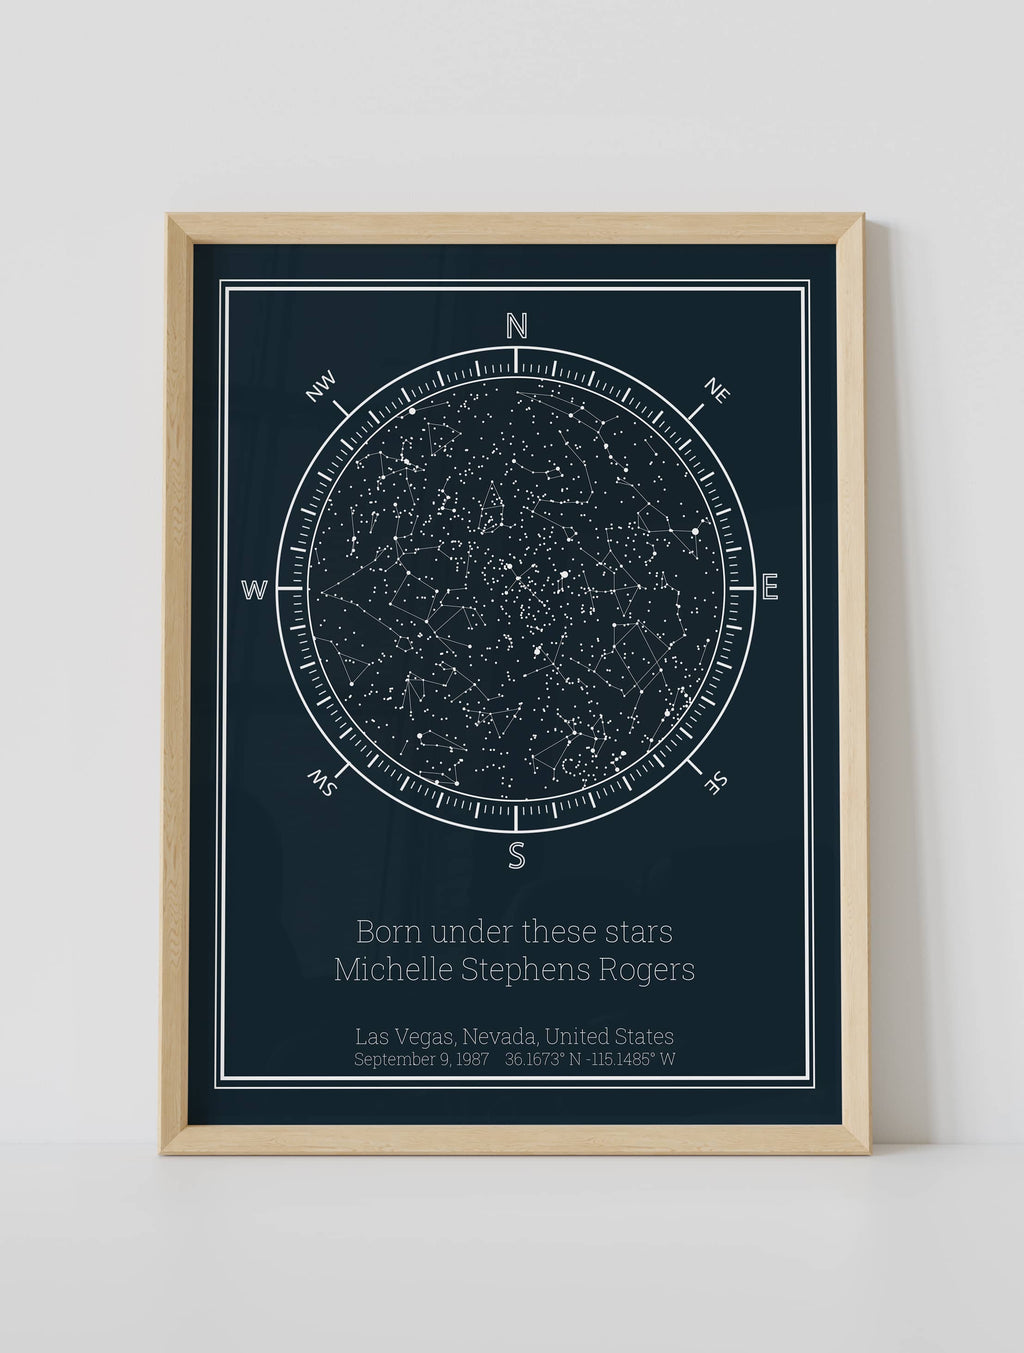 A framed custom star map poster featuring a specific date and location, customized with the quote "Born under these stars"